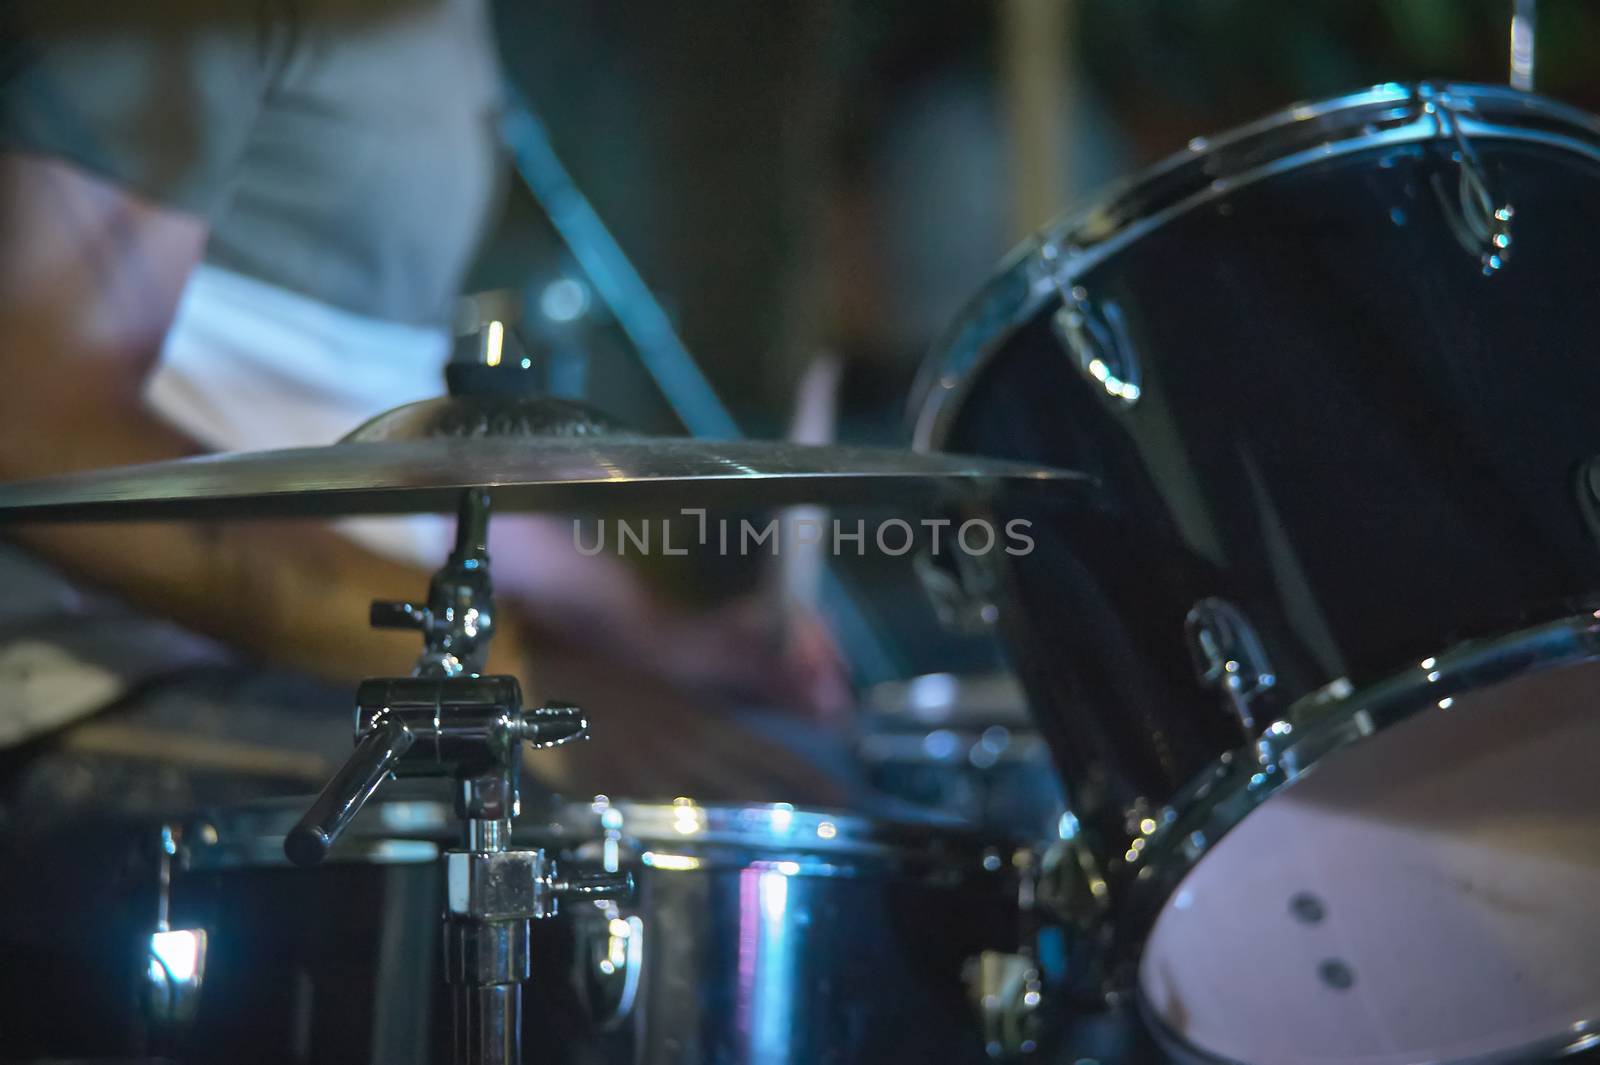 The drums by pippocarlot